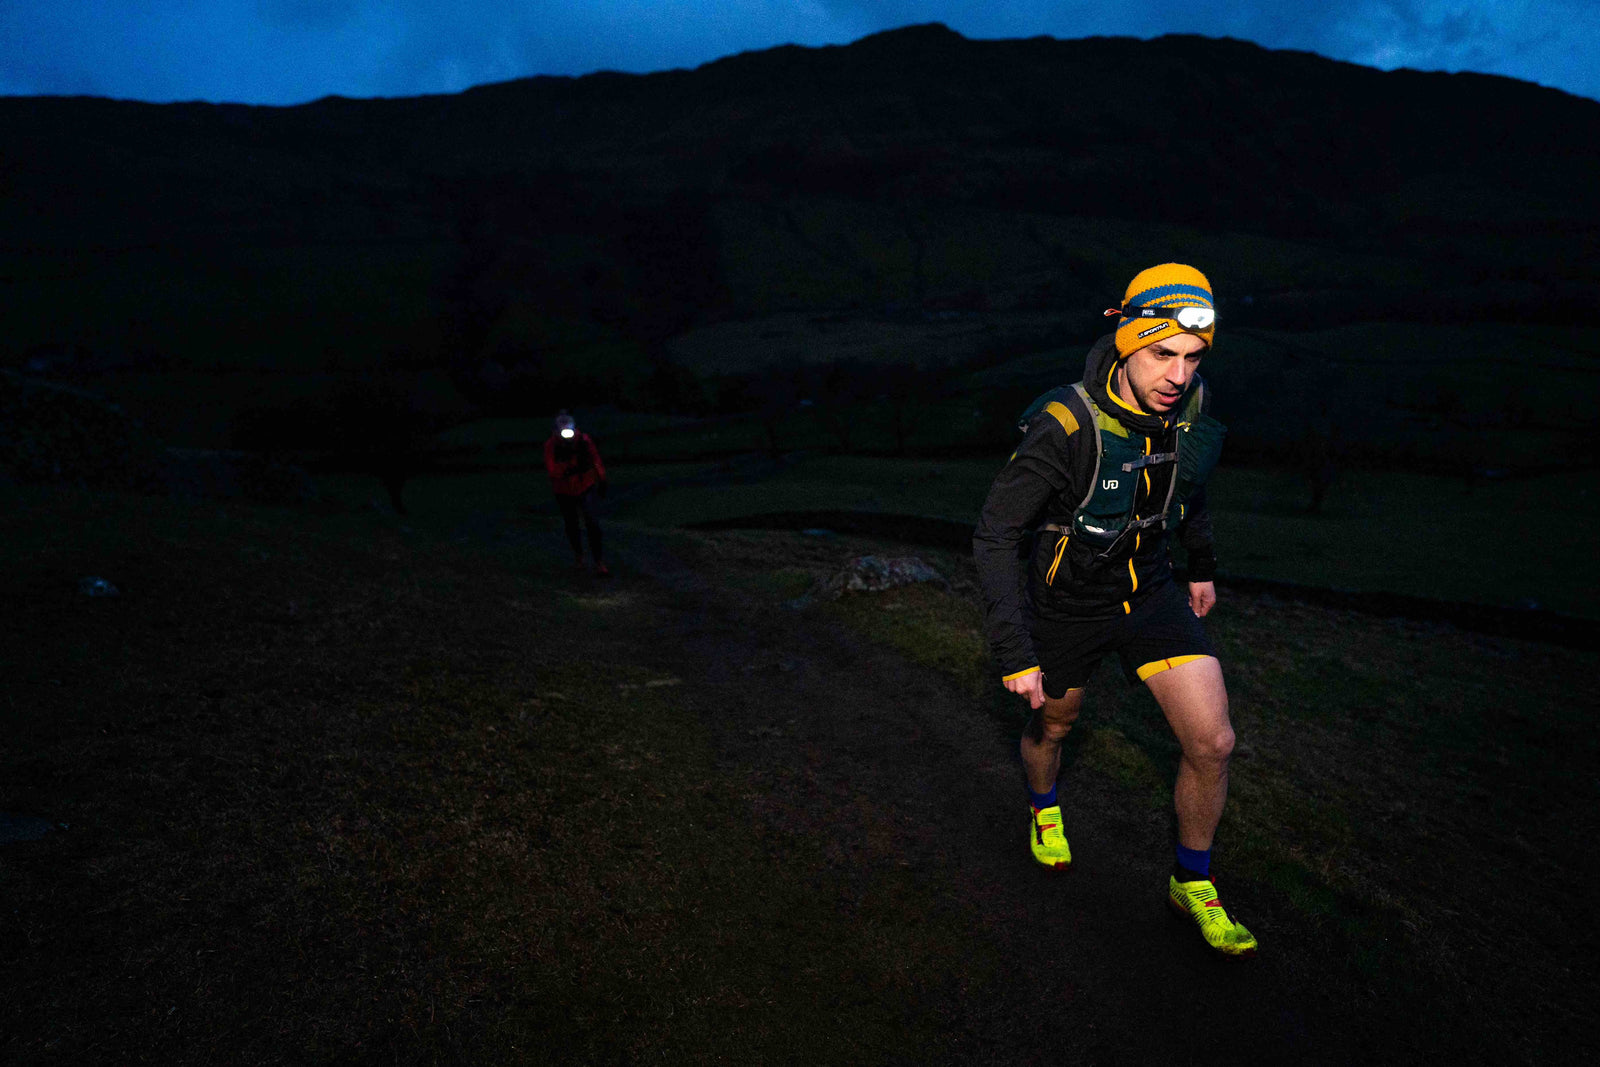 Petzl NAO® RL headtorch - Test and Review - Ultra Runner Mag